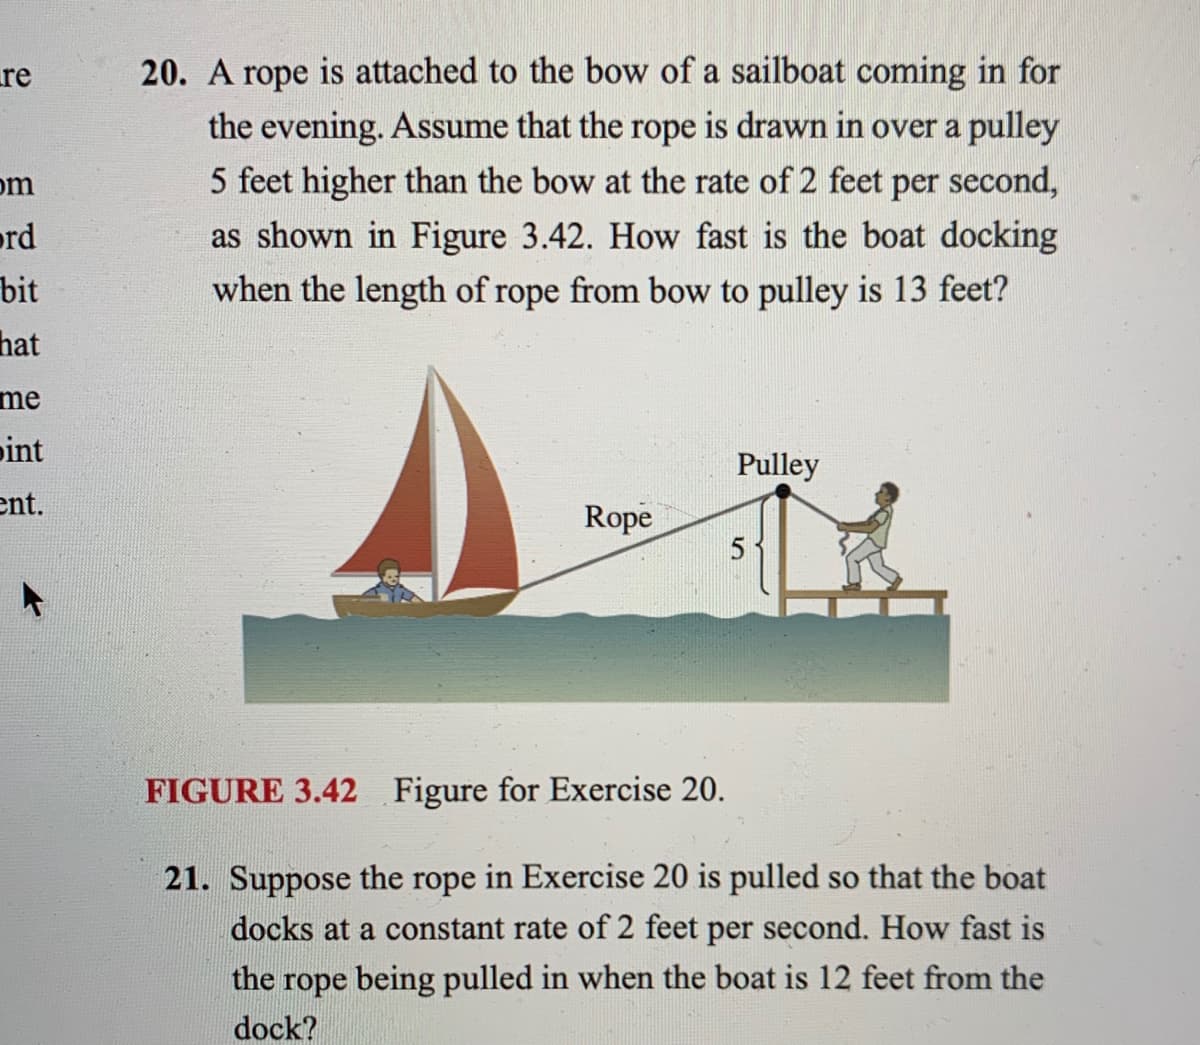 re
20. A rope is attached to the bow of a sailboat coming in for
the evening. Assume that the rope is drawn in over a pulley
5 feet higher than the bow at the rate of 2 feet per second,
om
ord
bit
as shown in Figure 3.42. How fast is the boat docking
when the length of rope from bow to pulley is 13 feet?
hat
me
pint
Pulley
ent.
Rope
FIGURE 3.42 Figure for Exercise 20.
21. Suppose the rope in Exercise 20 is pulled so that the boat
docks at a constant rate of 2 feet per second. How fast is
the rope being pulled in when the boat is 12 feet from the
dock?
